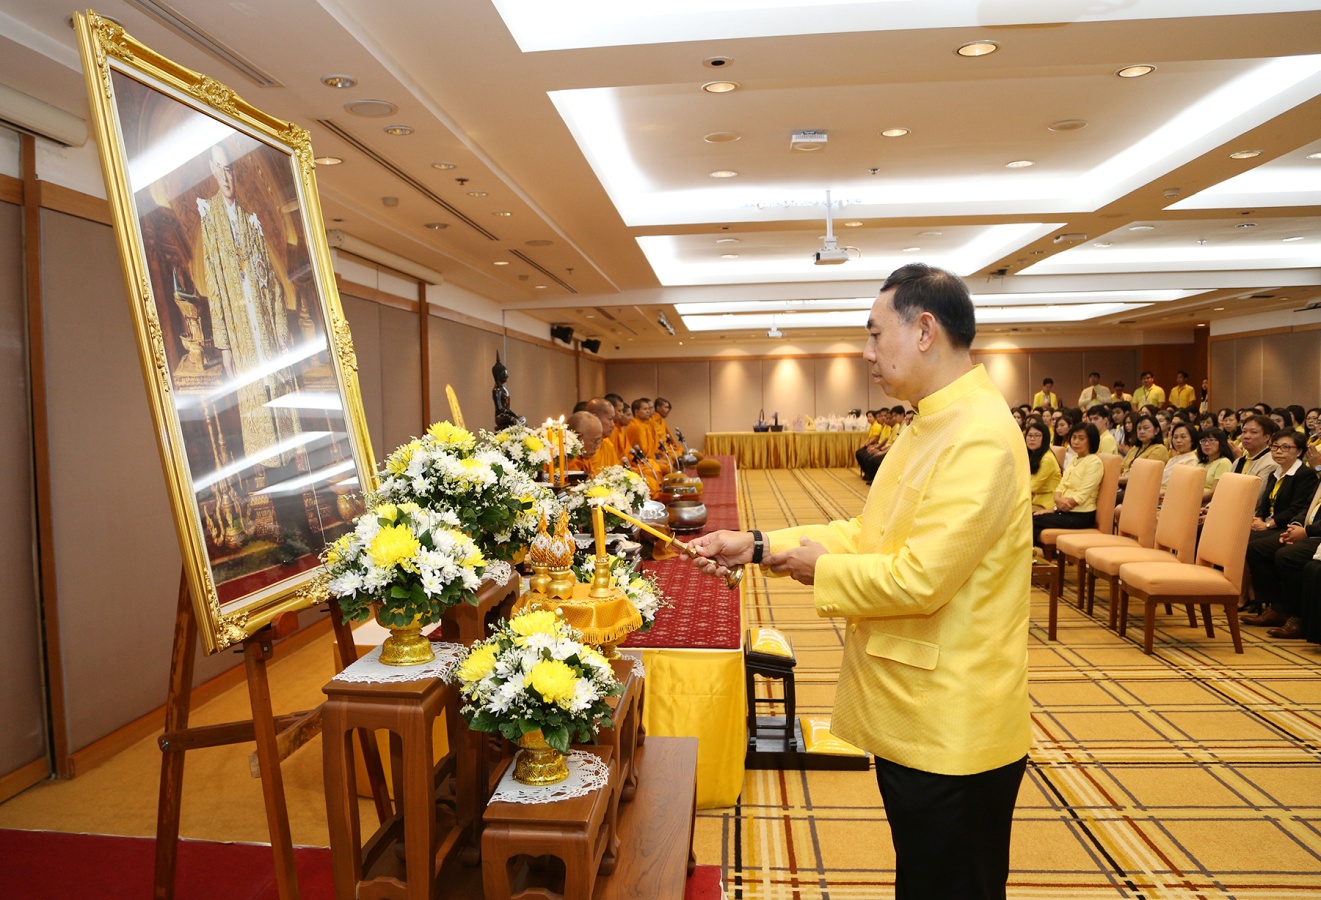 EXIM Thailand Holds Merit-making Ceremony to Commemorate the Late King Bhumibol Adulyadej’s Passing on October 13, 2018